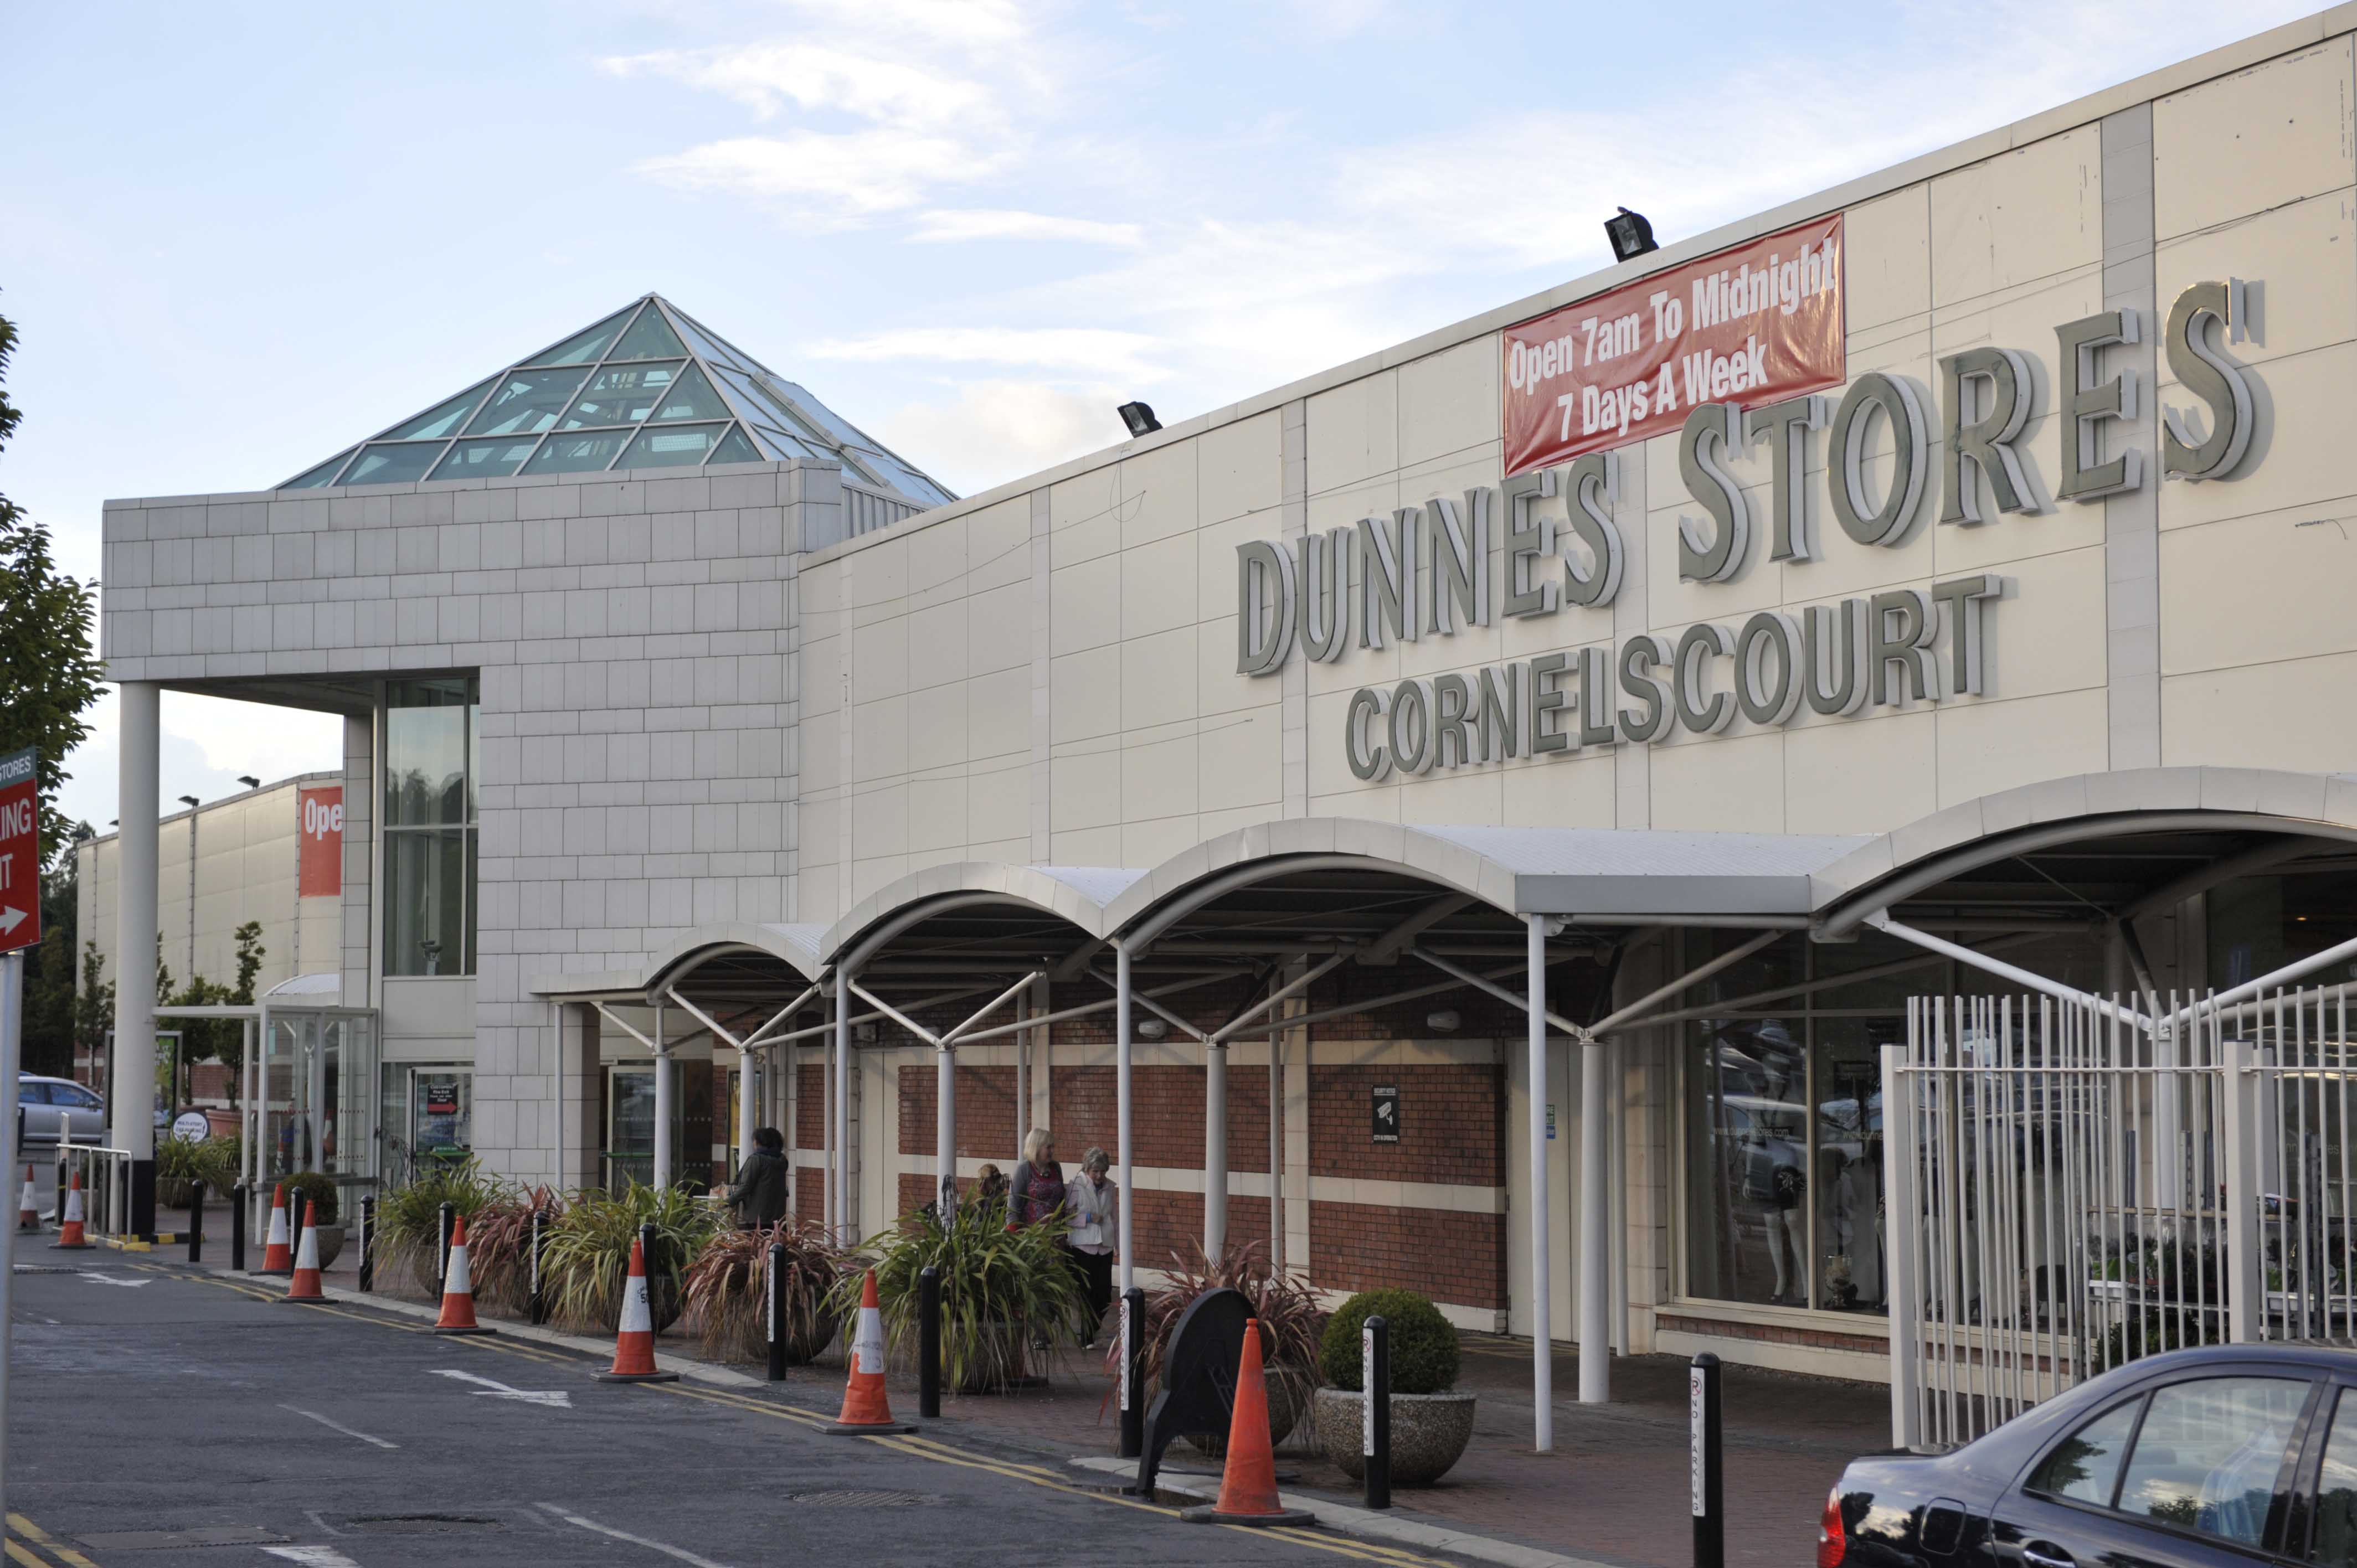 Dunnes has 112 branches across the Republic of Ireland with more than 10,000 workers